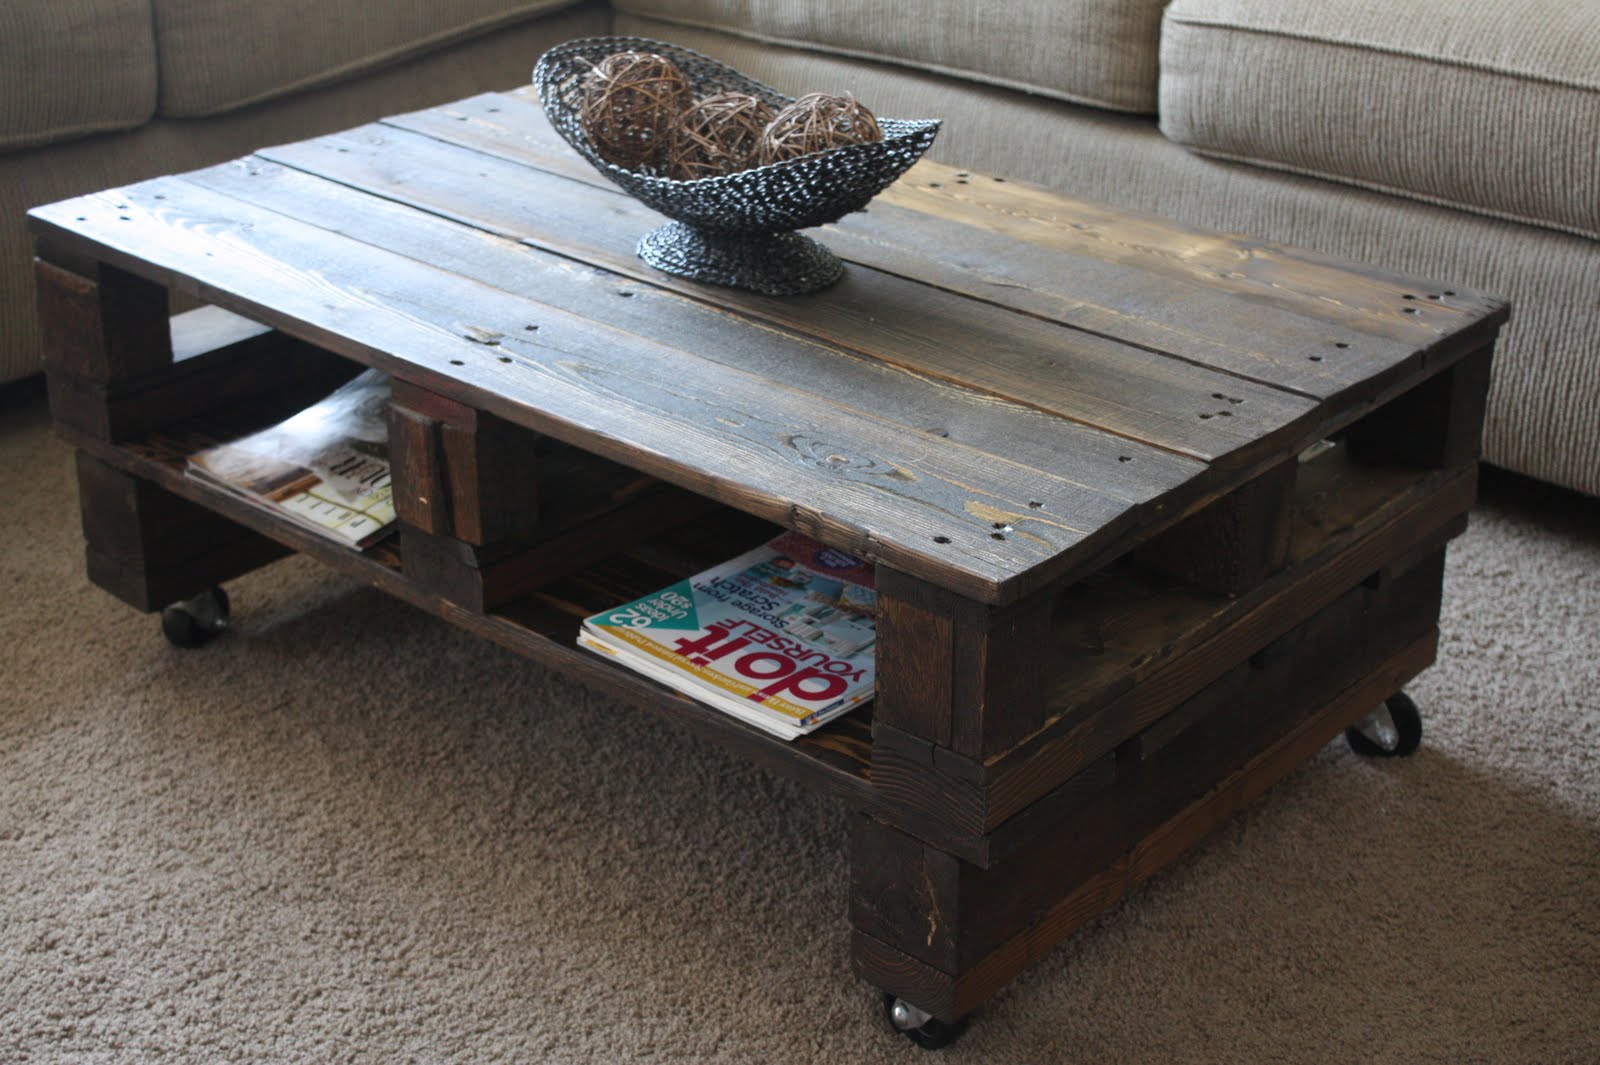  | Pallet Coffee Table Plan Plans Download laser wood carving